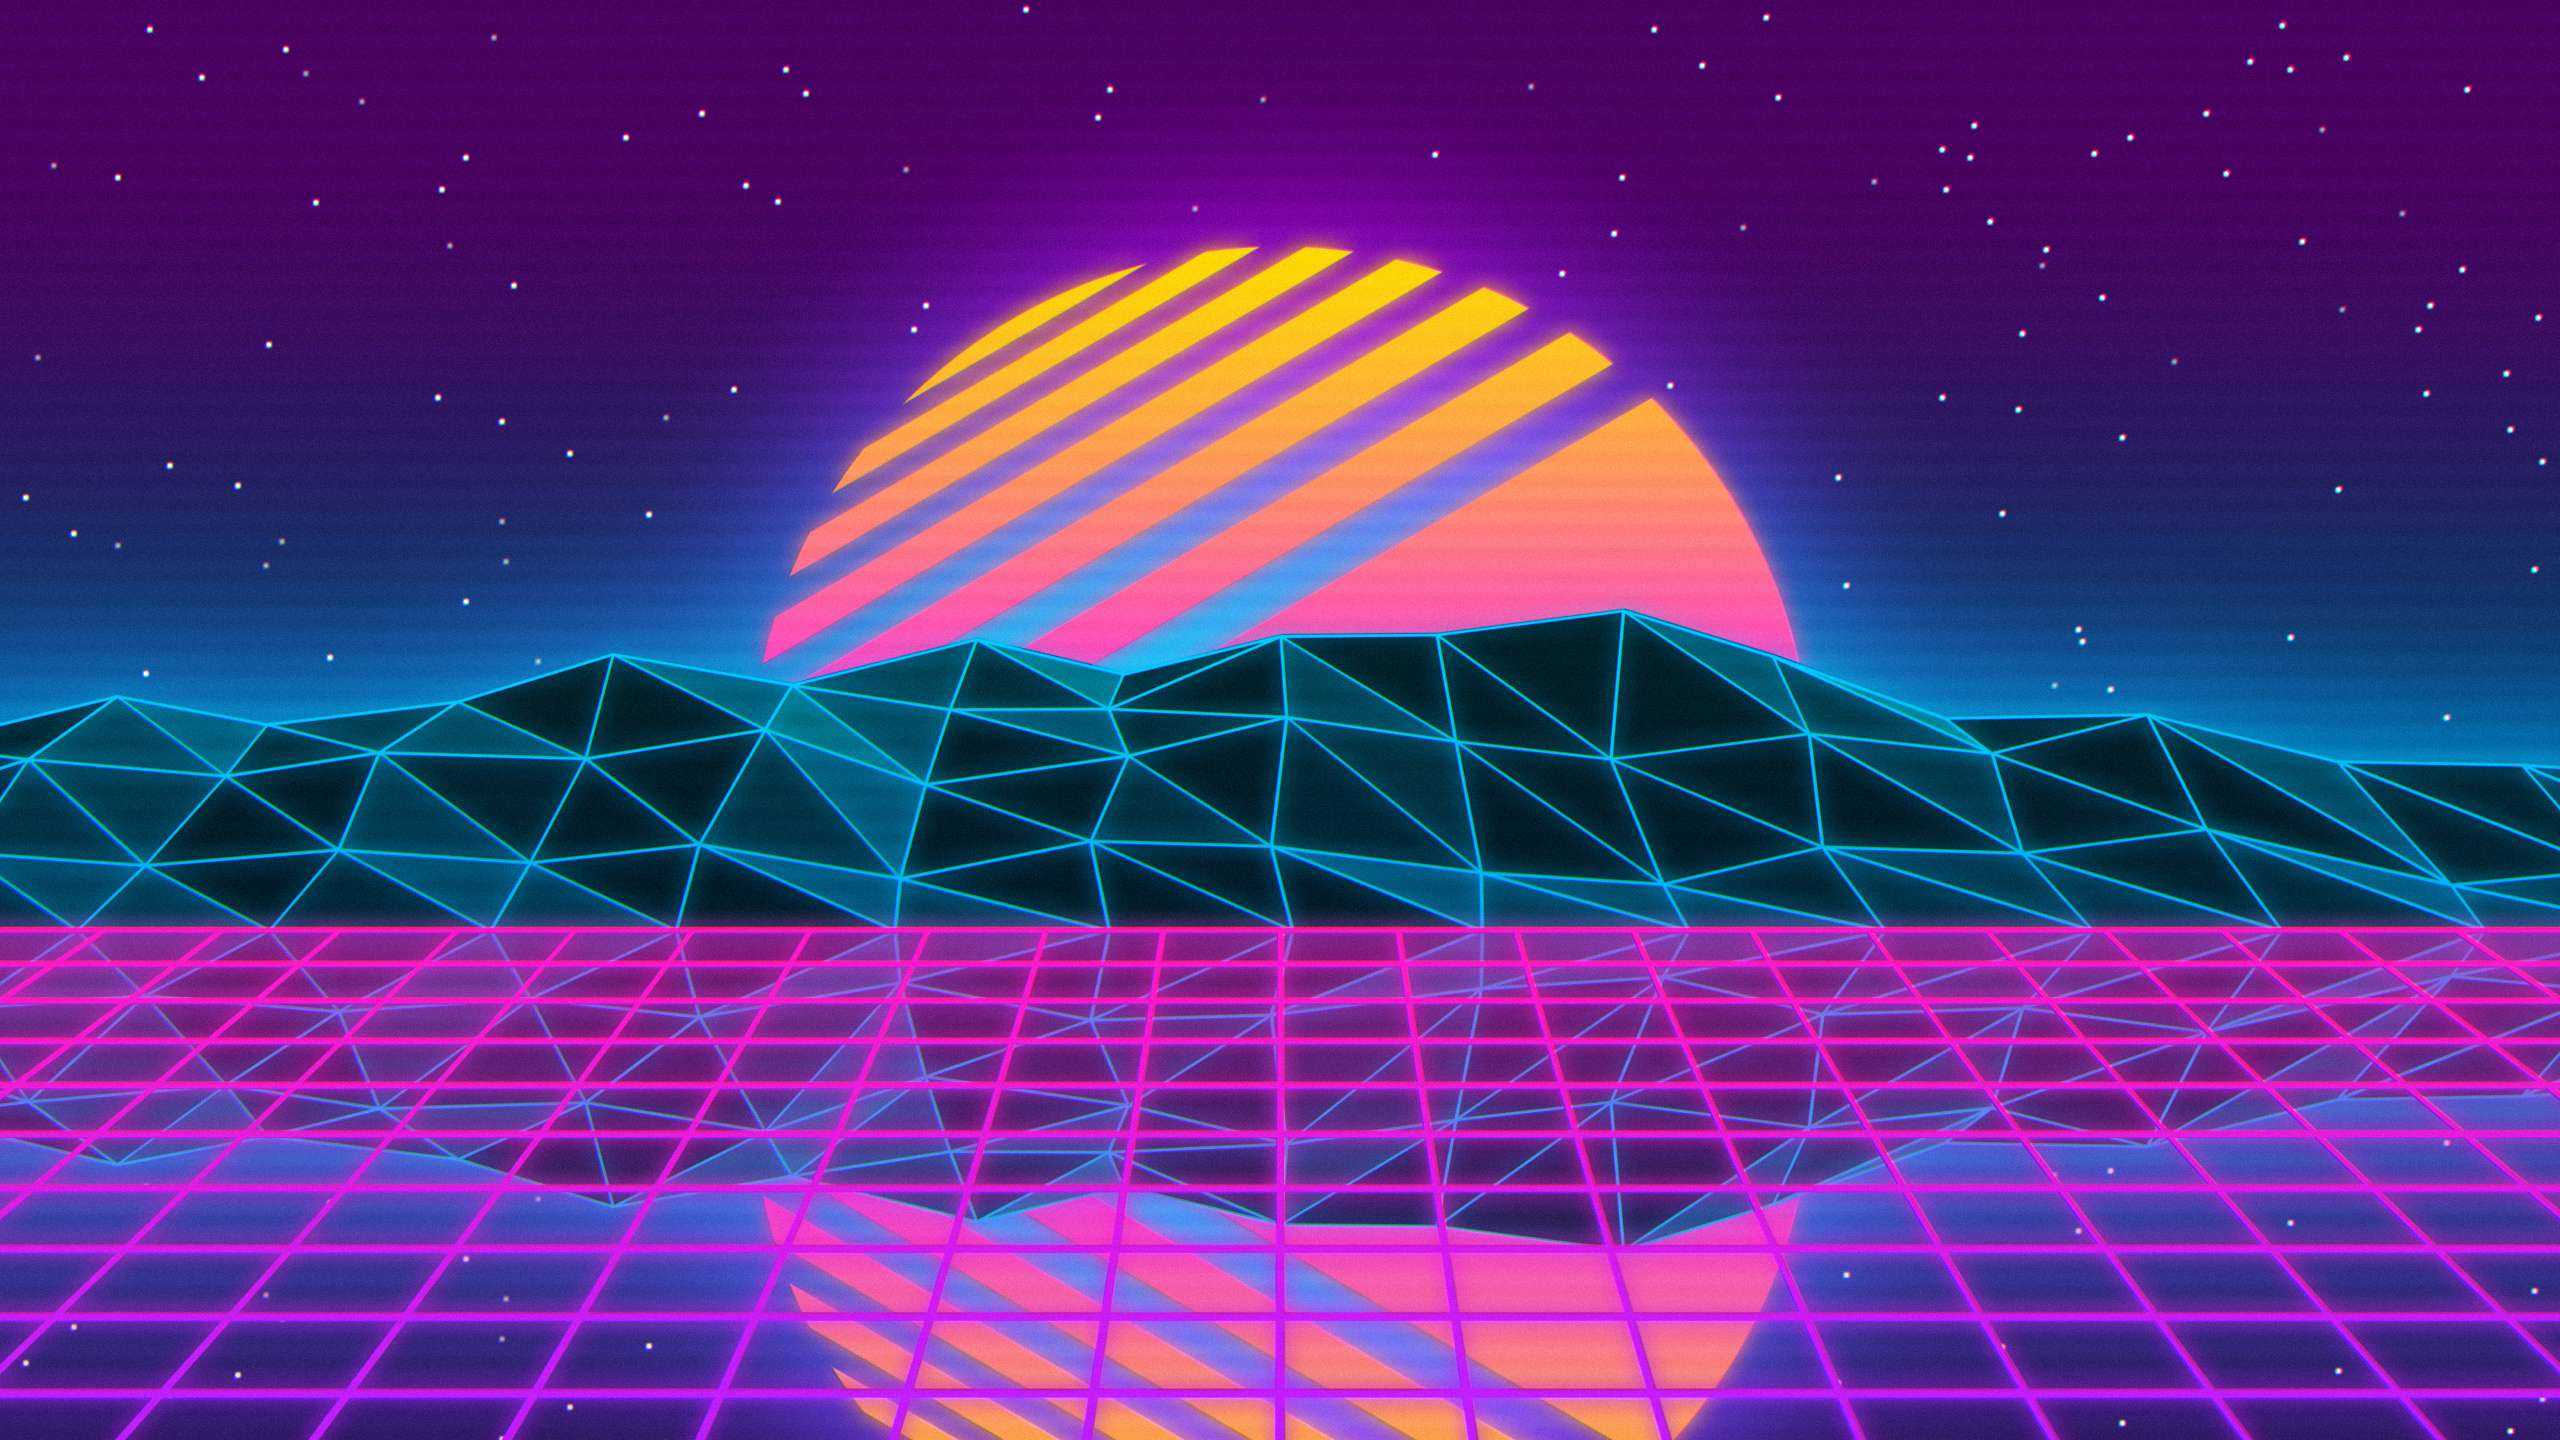 A retro 80s style sunset with mountains and clouds - Vaporwave, synthwave, 2560x1440